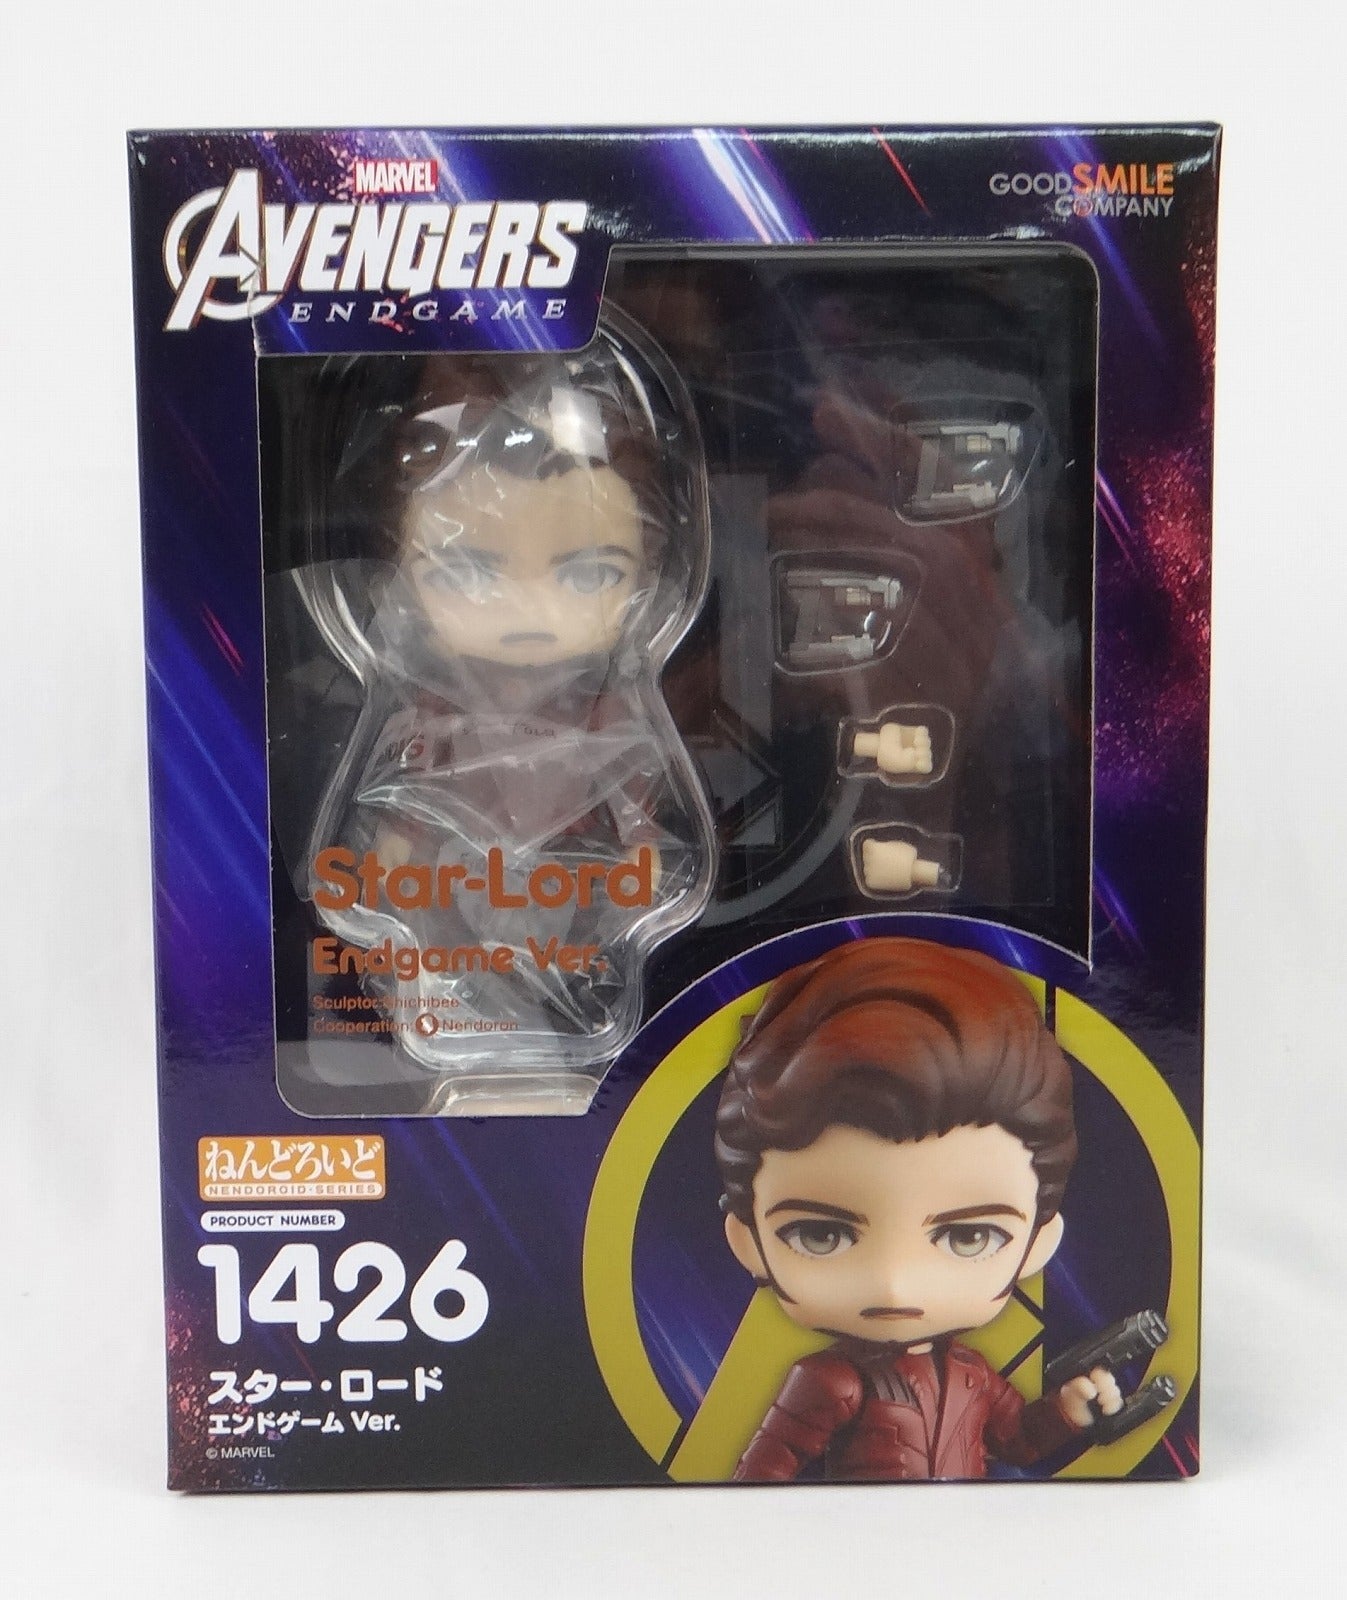 Nendoroid No.1426 Star Road End Game Ver. (Avengers / End Games